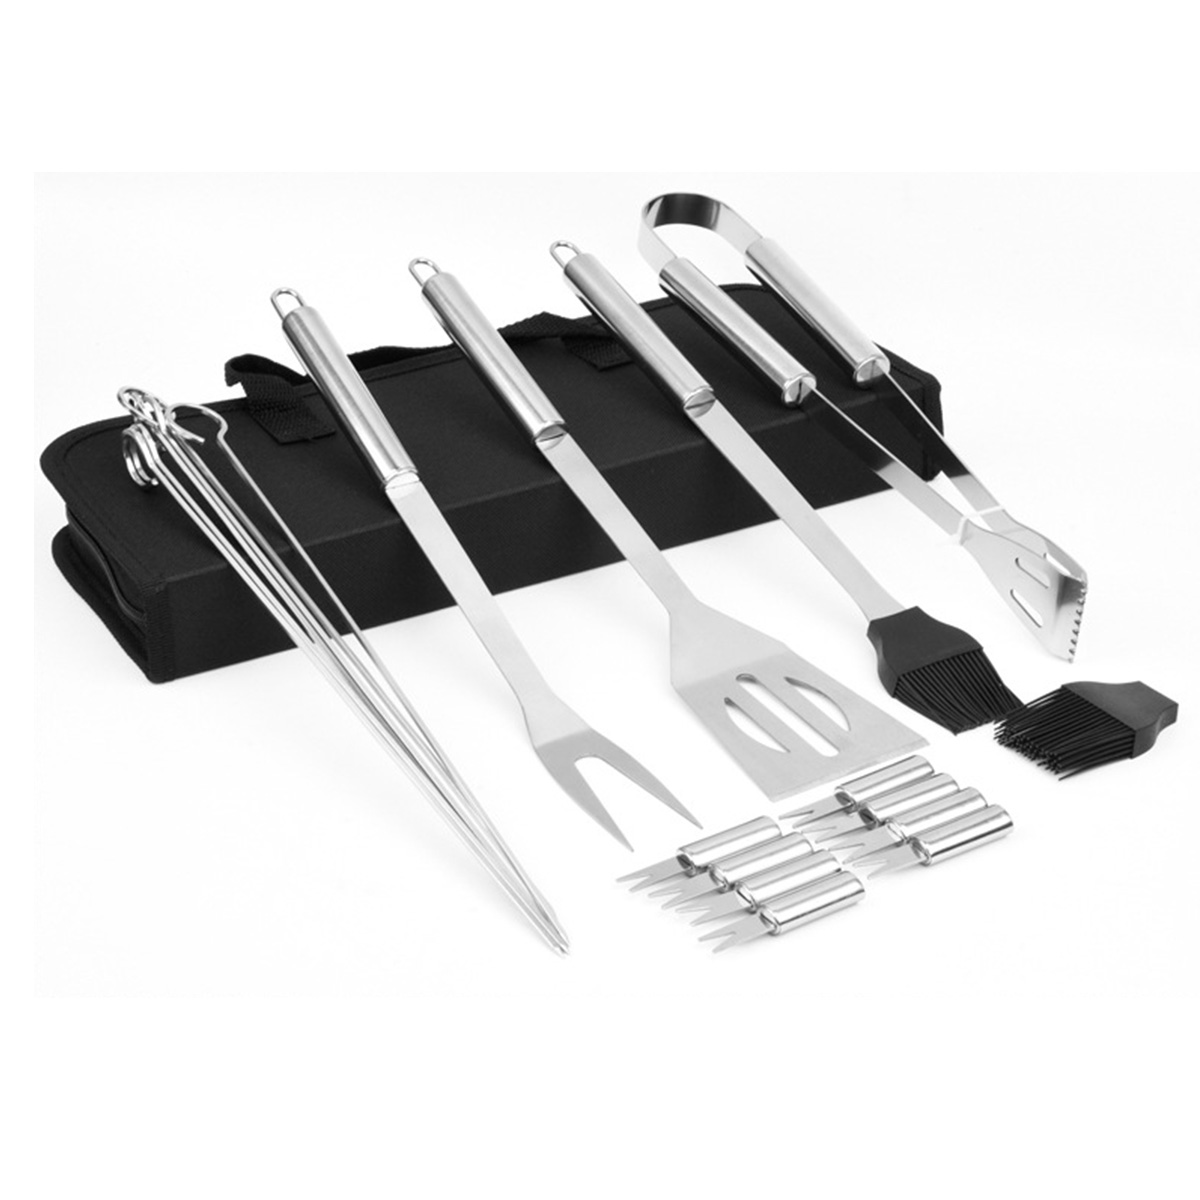 

Barbecue Grilling Tools Set BBQ Utensils Stainless Steel BBQ Stick Fork Camping Outdoor Cooking Tools